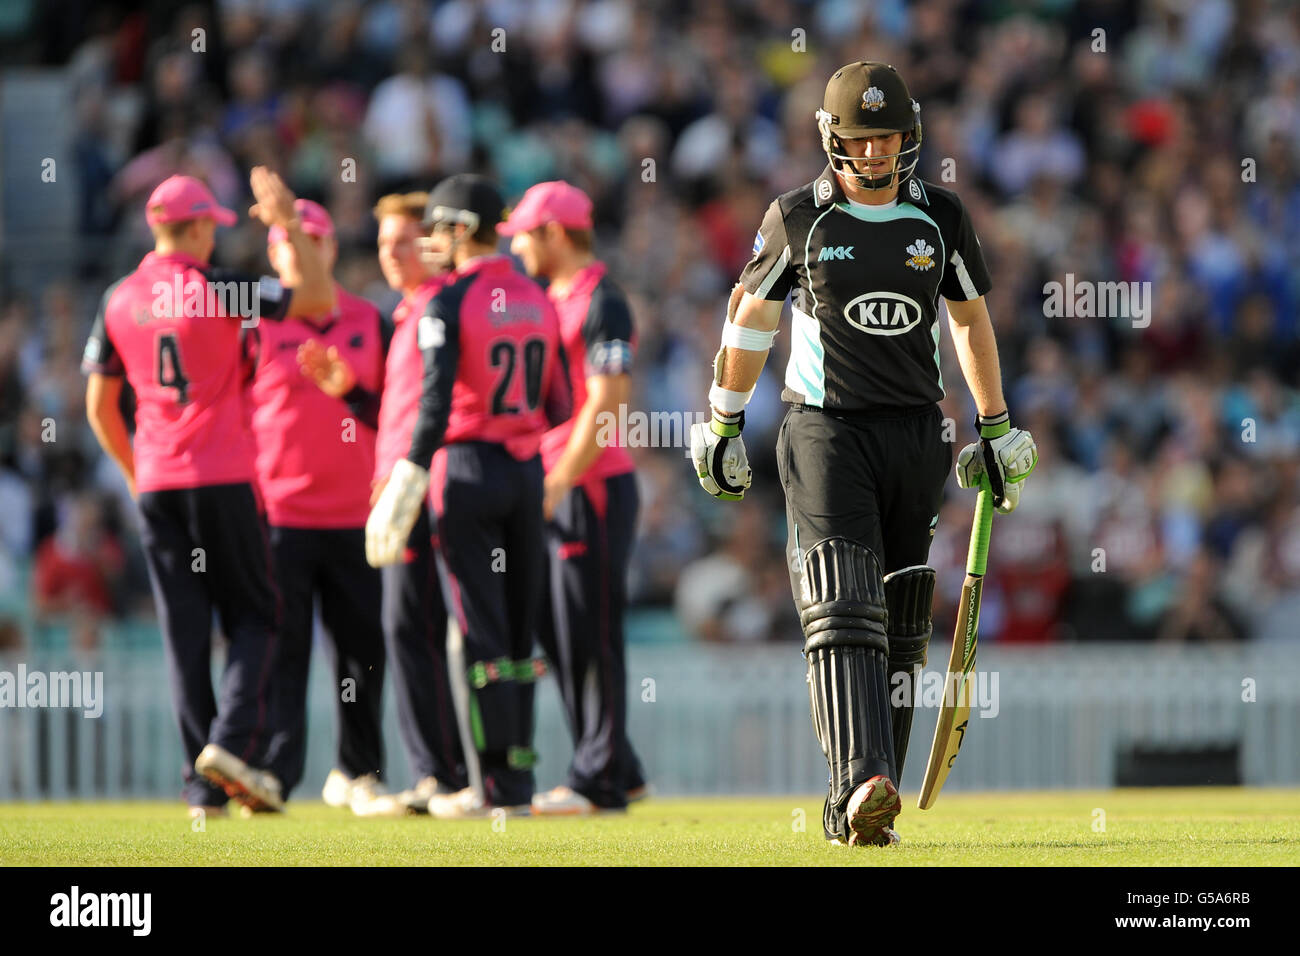 Surrey Lions' Steven Davies walks away dejected after losing his wicket, as Middlesex Panthers players celebrate in the background Stock Photo